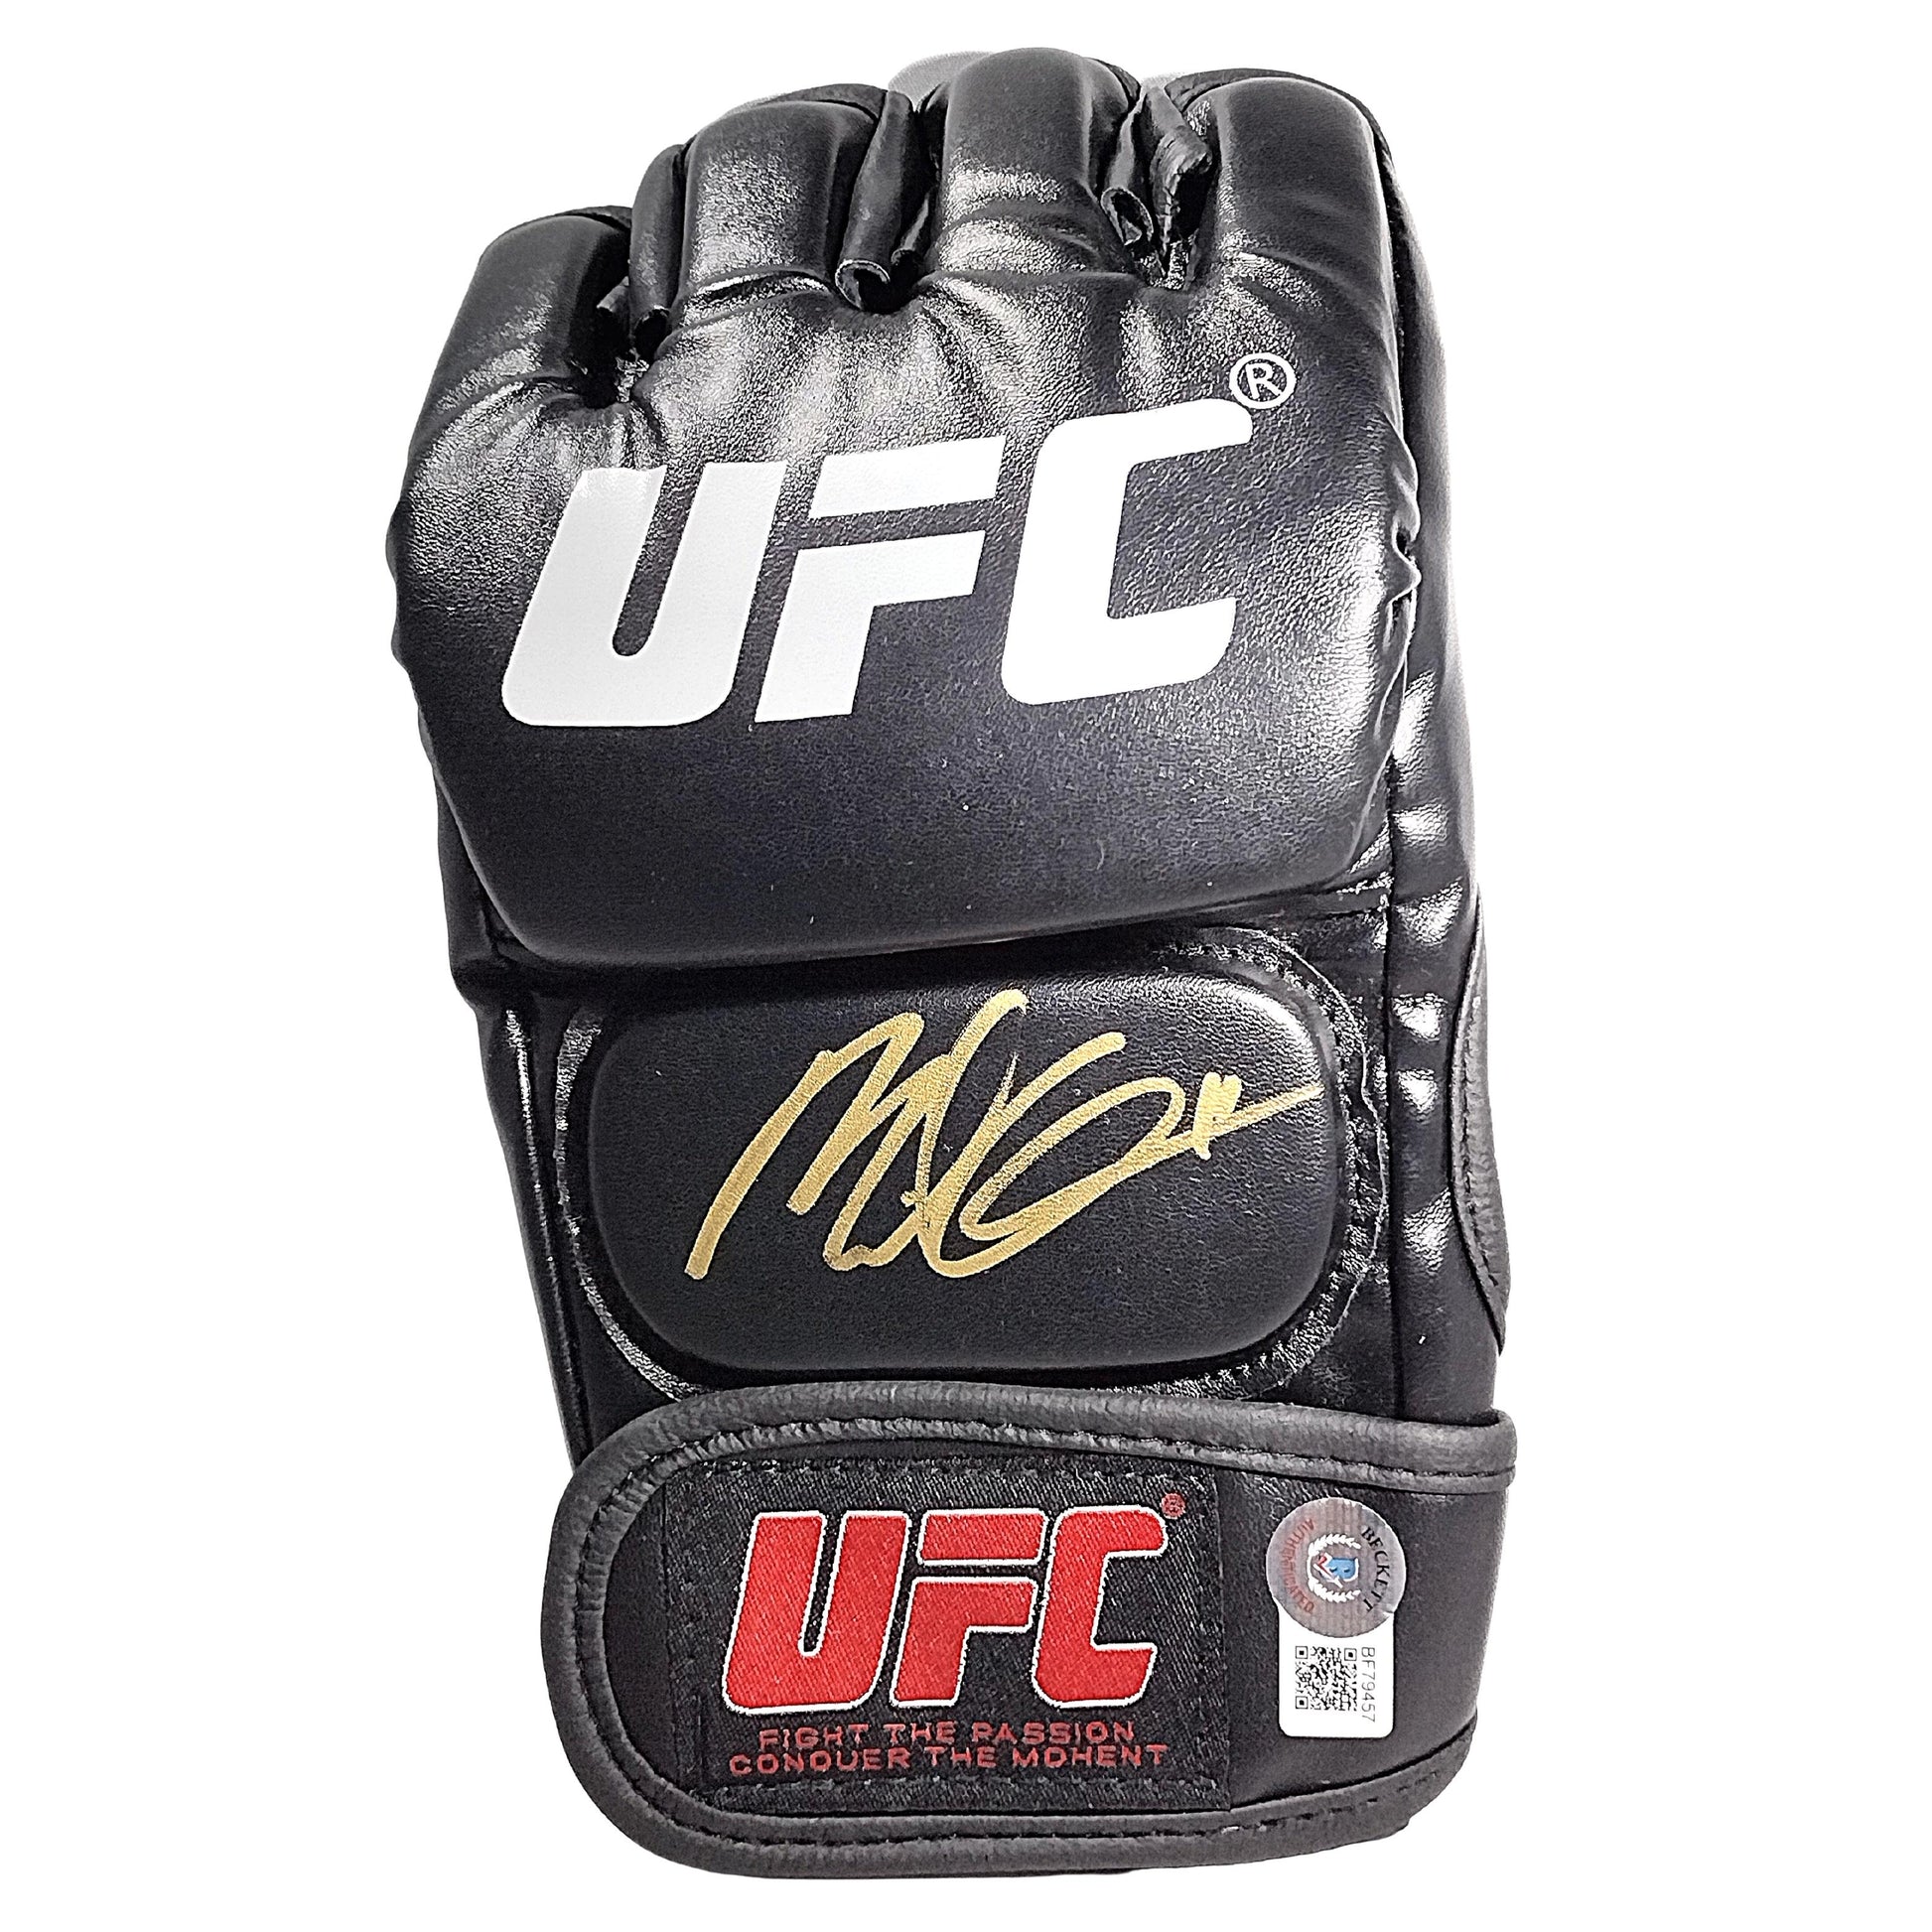 UFC- Autographed- Michael Chiesa Signed Ultimate Fighting Championship Glove Beckett Certified Authentic 101